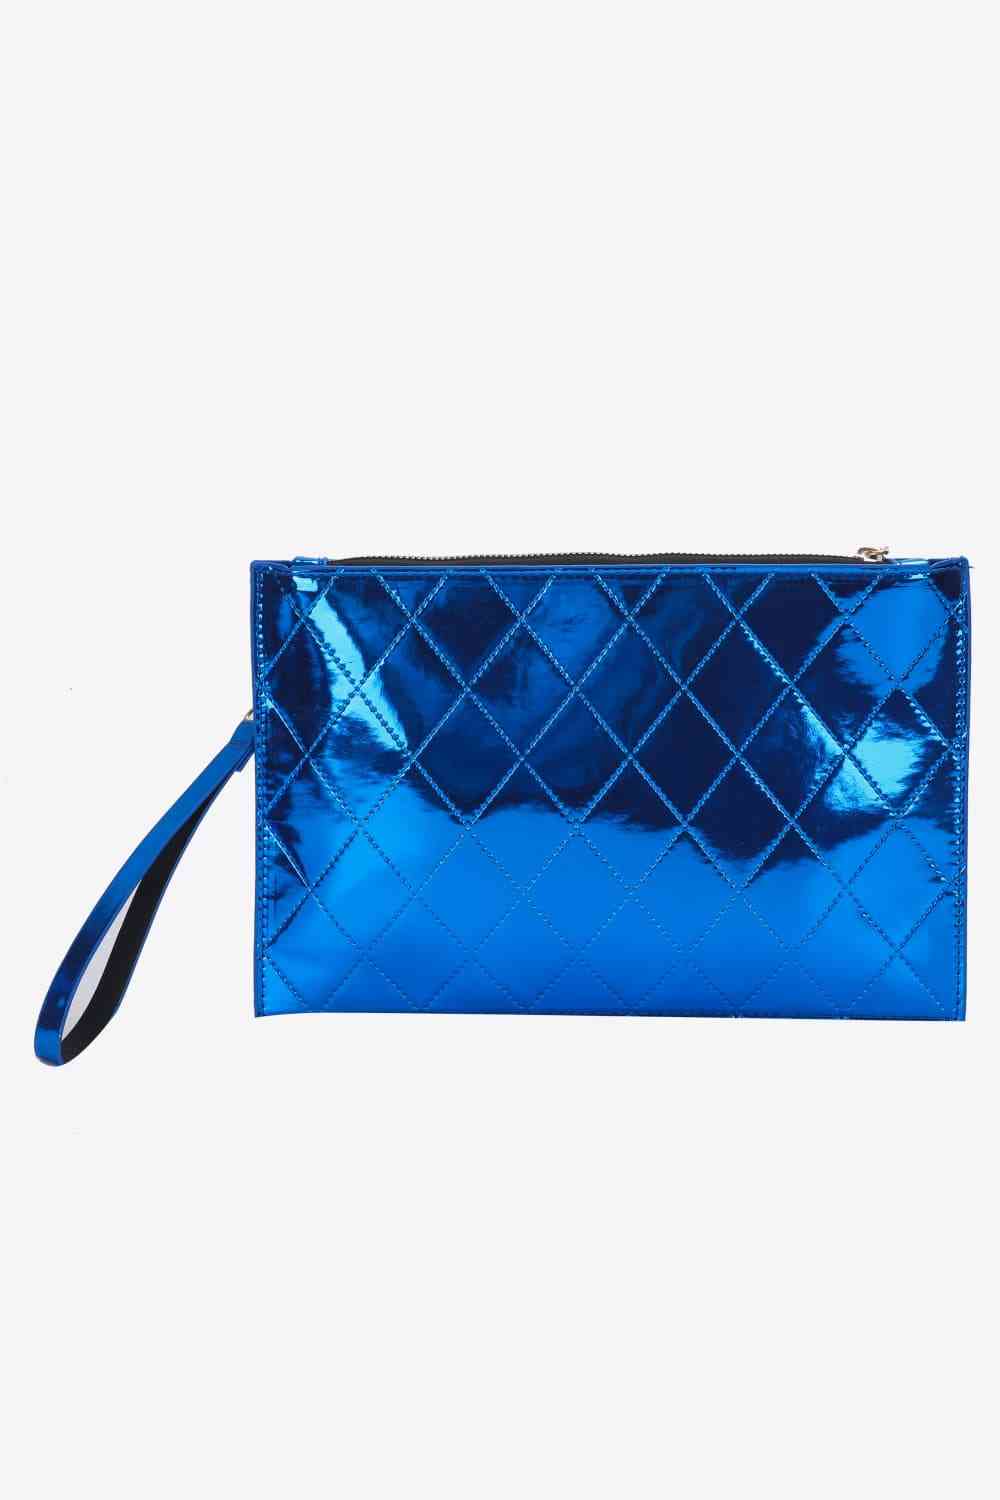 PU Leather Wristlet Bag - Cobalt Blue / One Size - All Products - Handbags - 5 - 2024